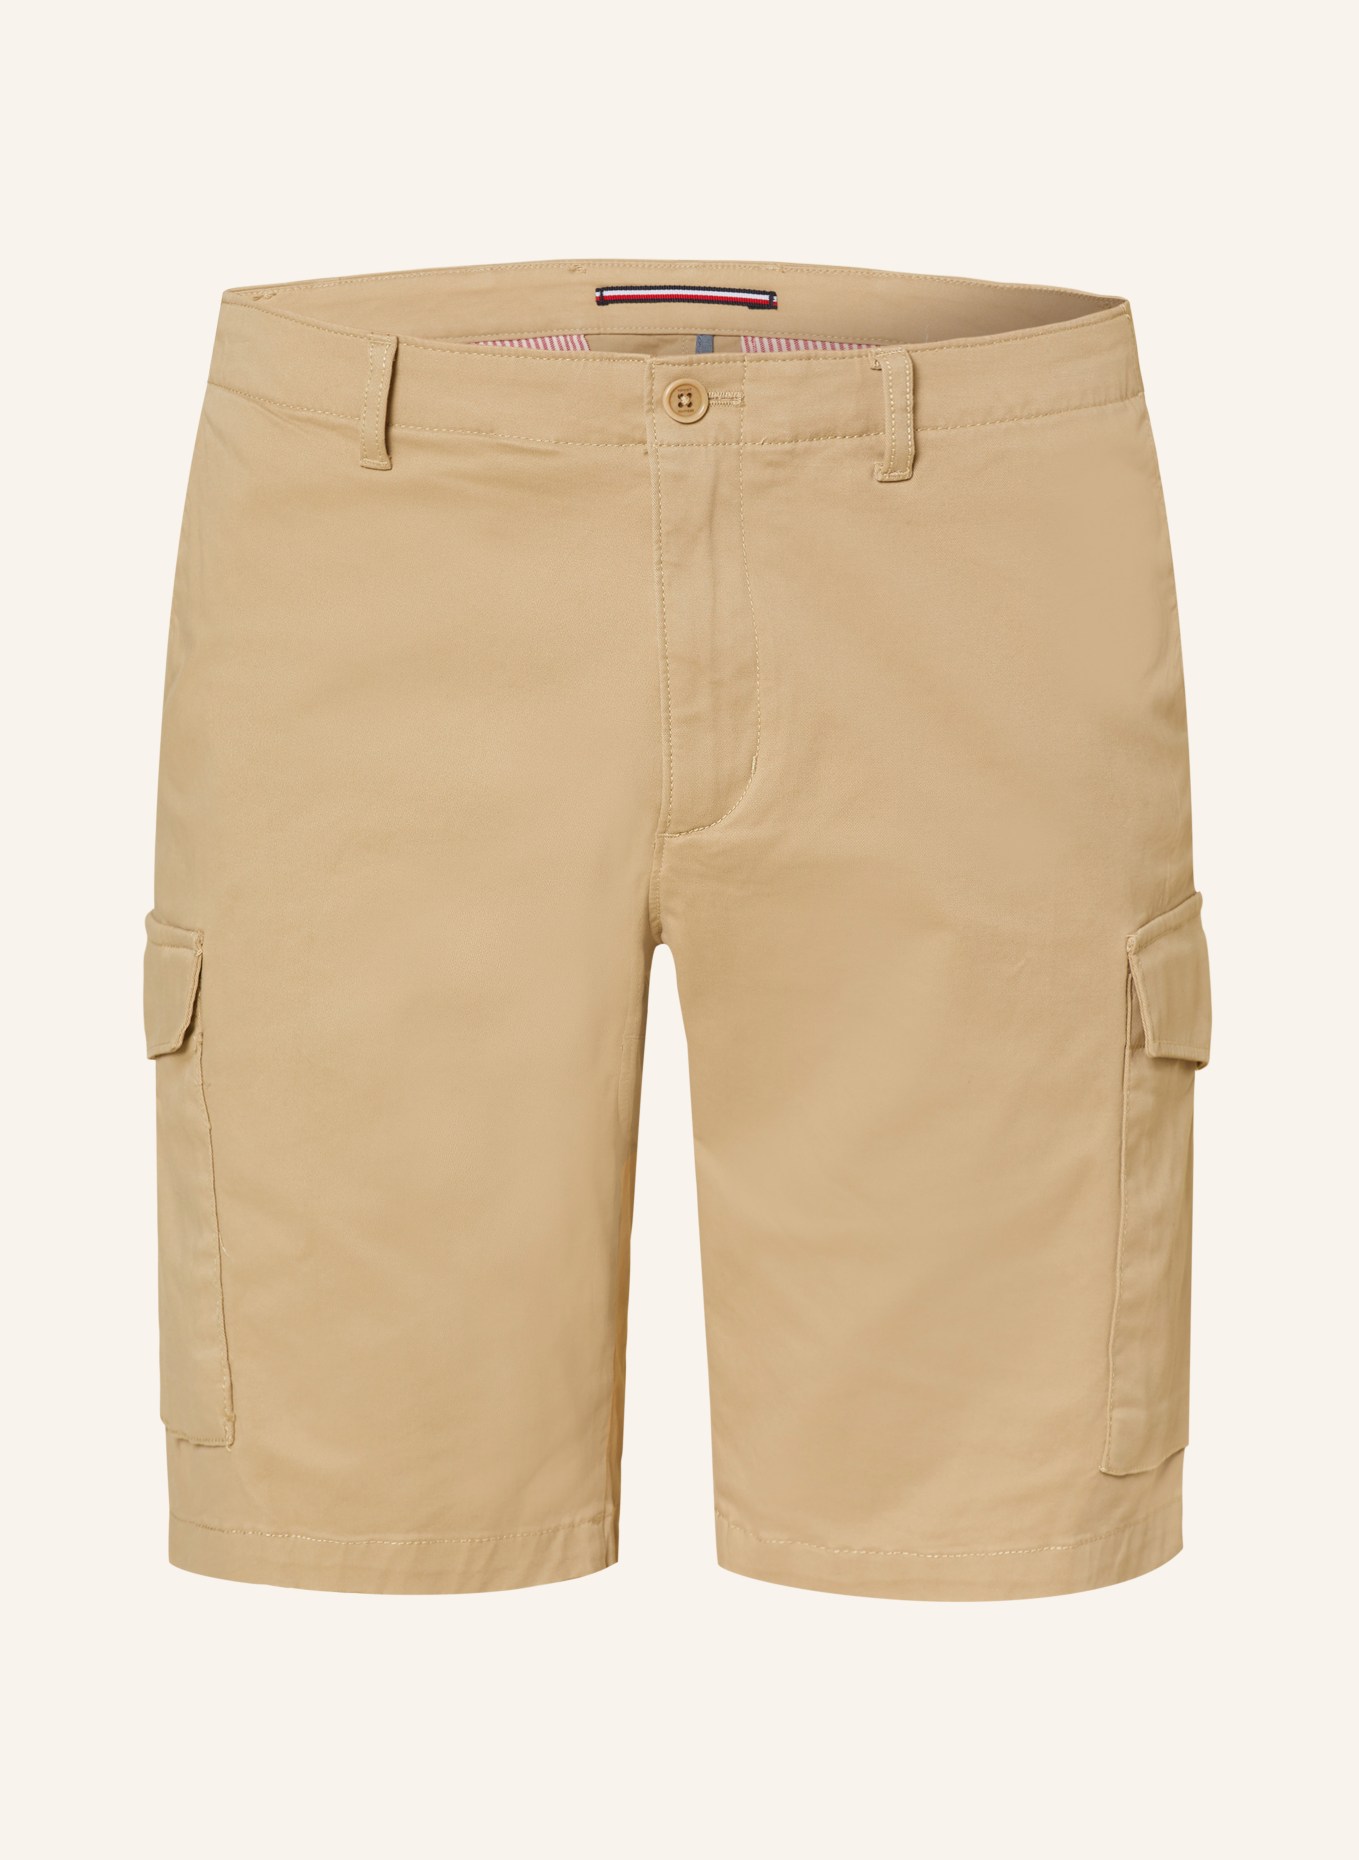 TOMMY HILFIGER Cargoshorts HARLEM Relaxed Tapered Fit, Farbe: BEIGE (Bild 1)